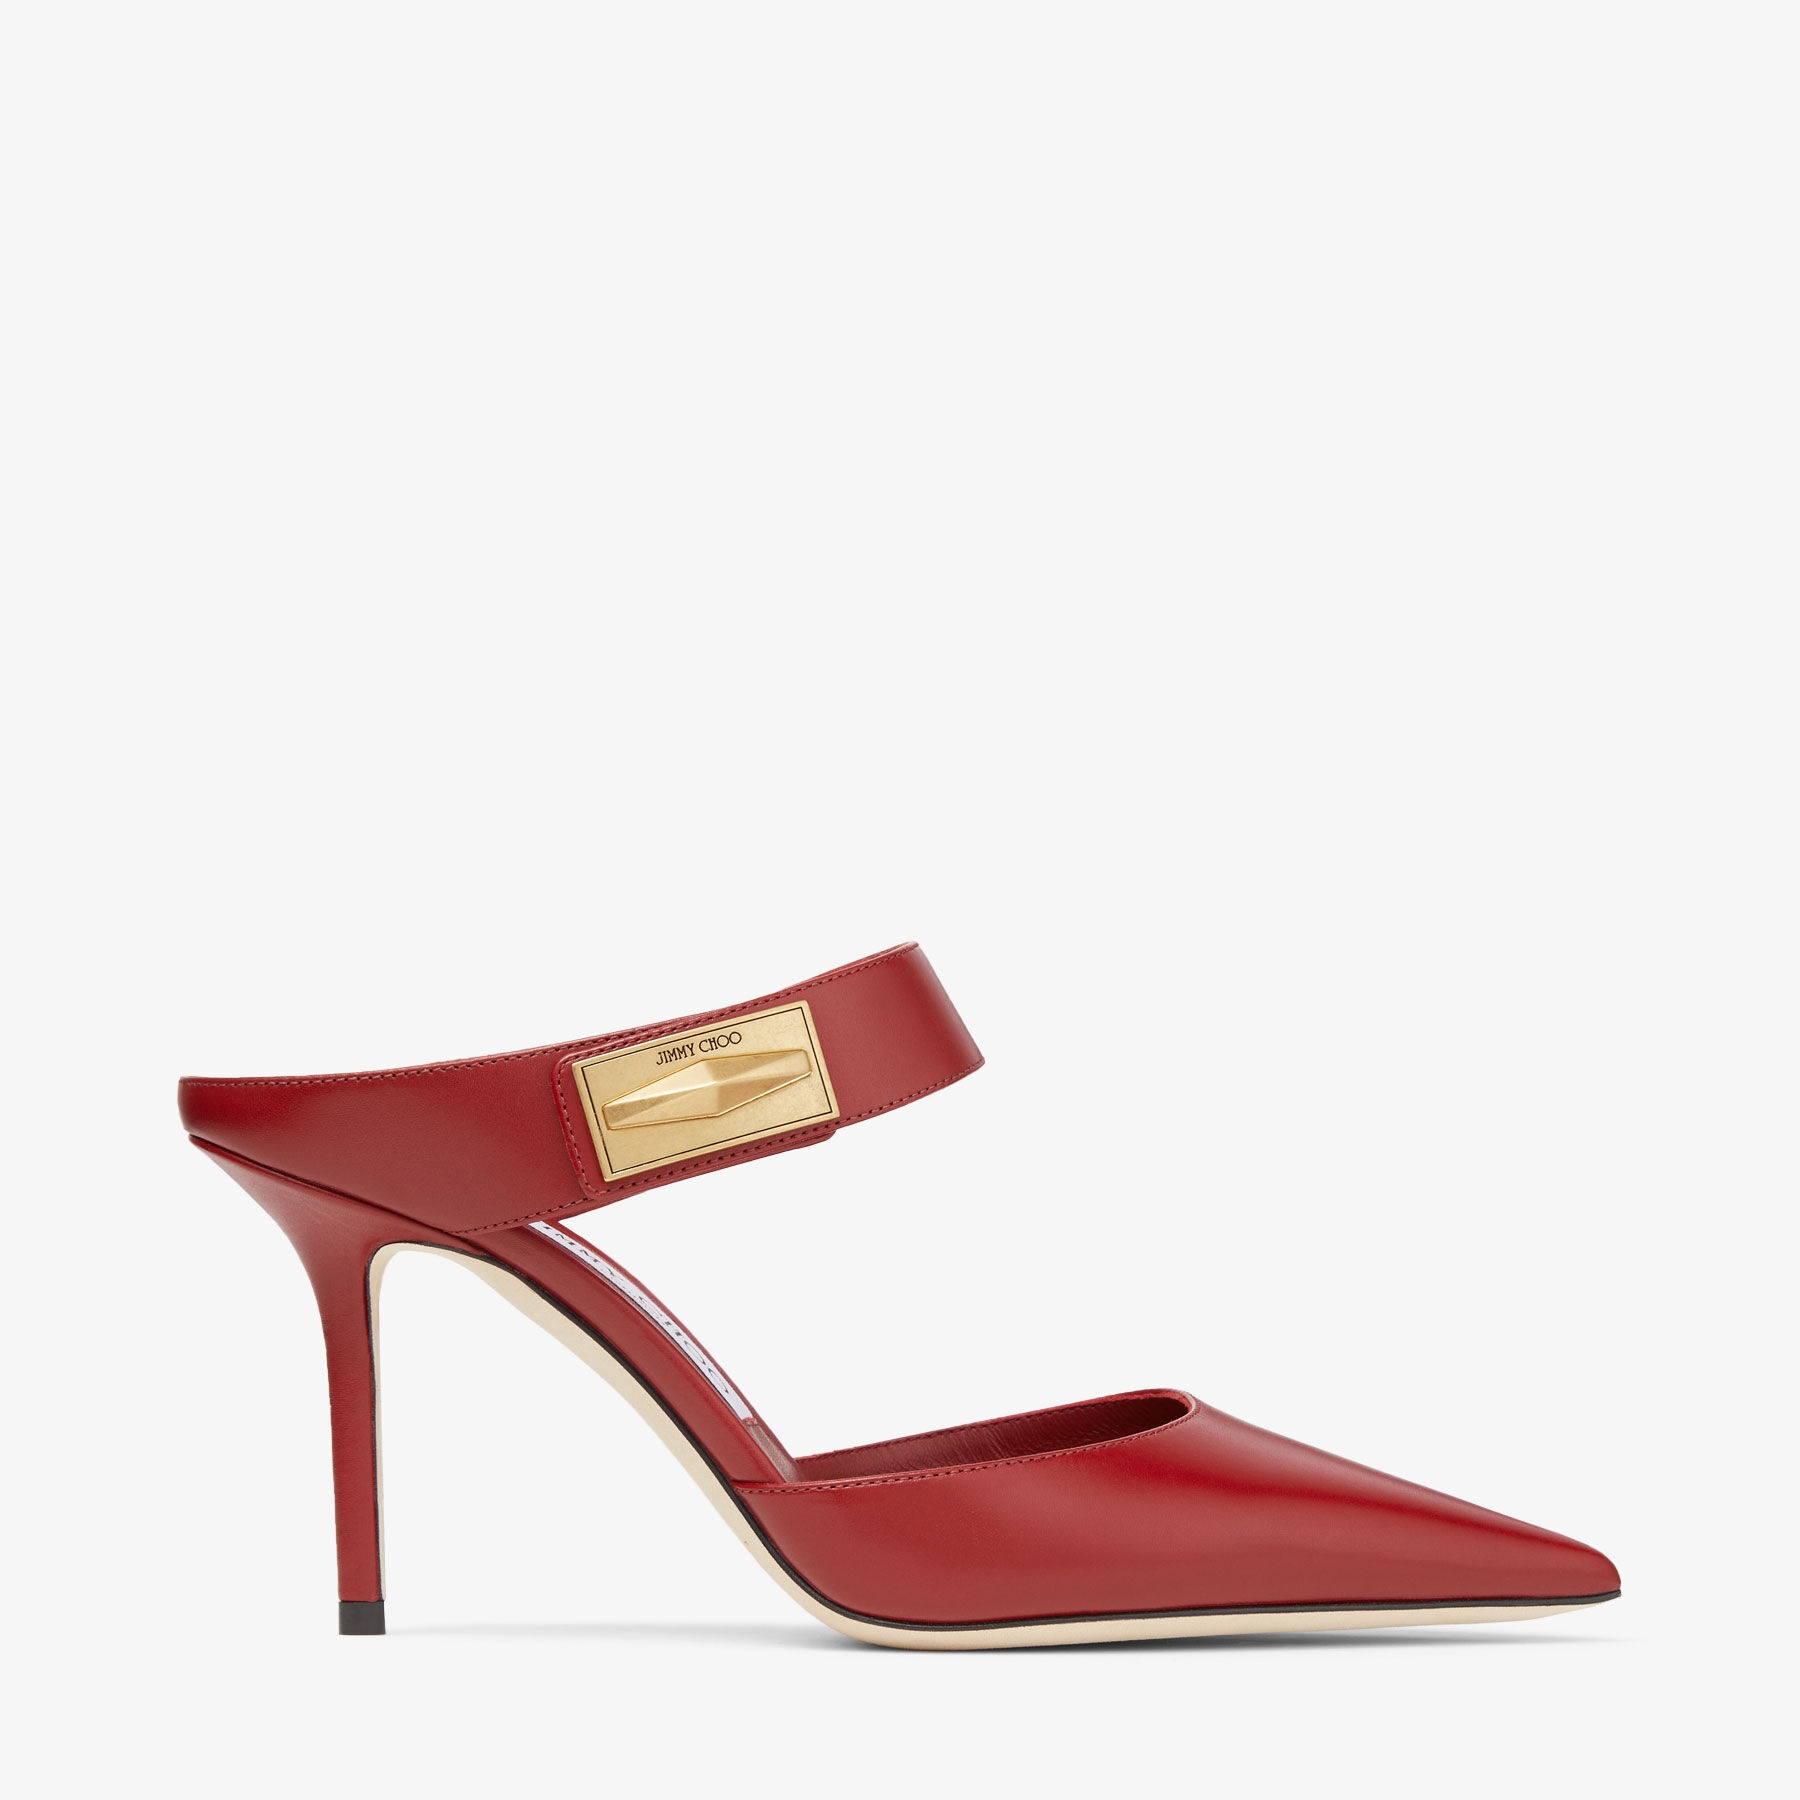 Nell Mule 85
Cranberry Calf Leather Mules - 1